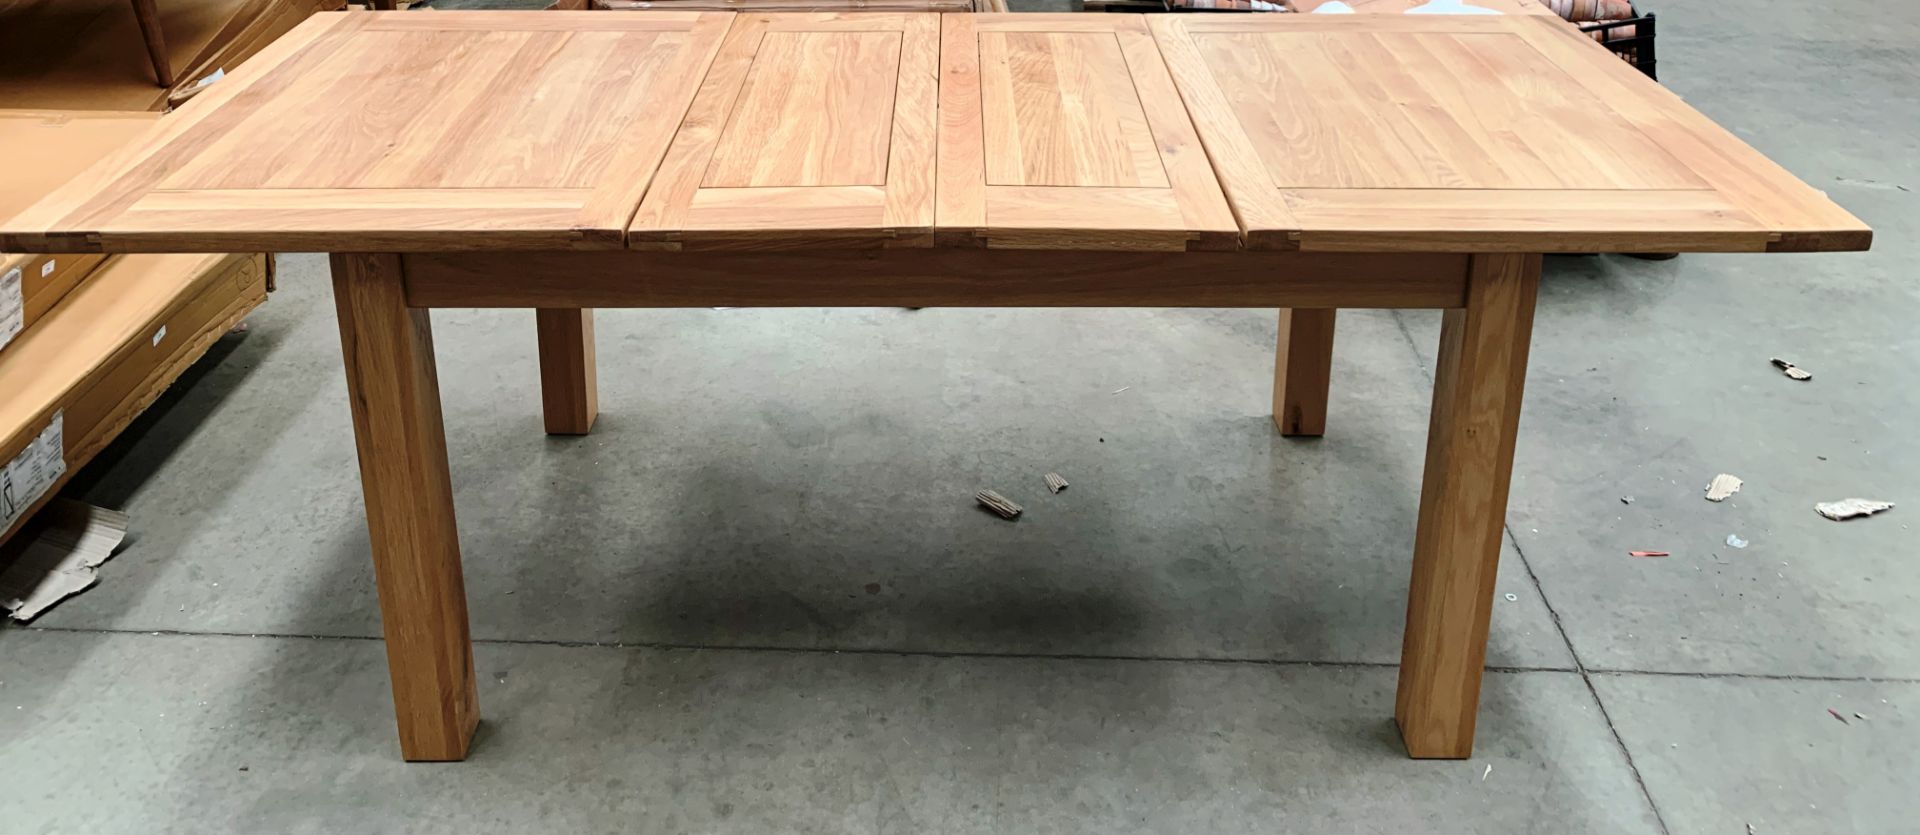 Natural oak extending dining table 142cm x 92cm with two extra leaves extending to approx 216cm - Image 3 of 5